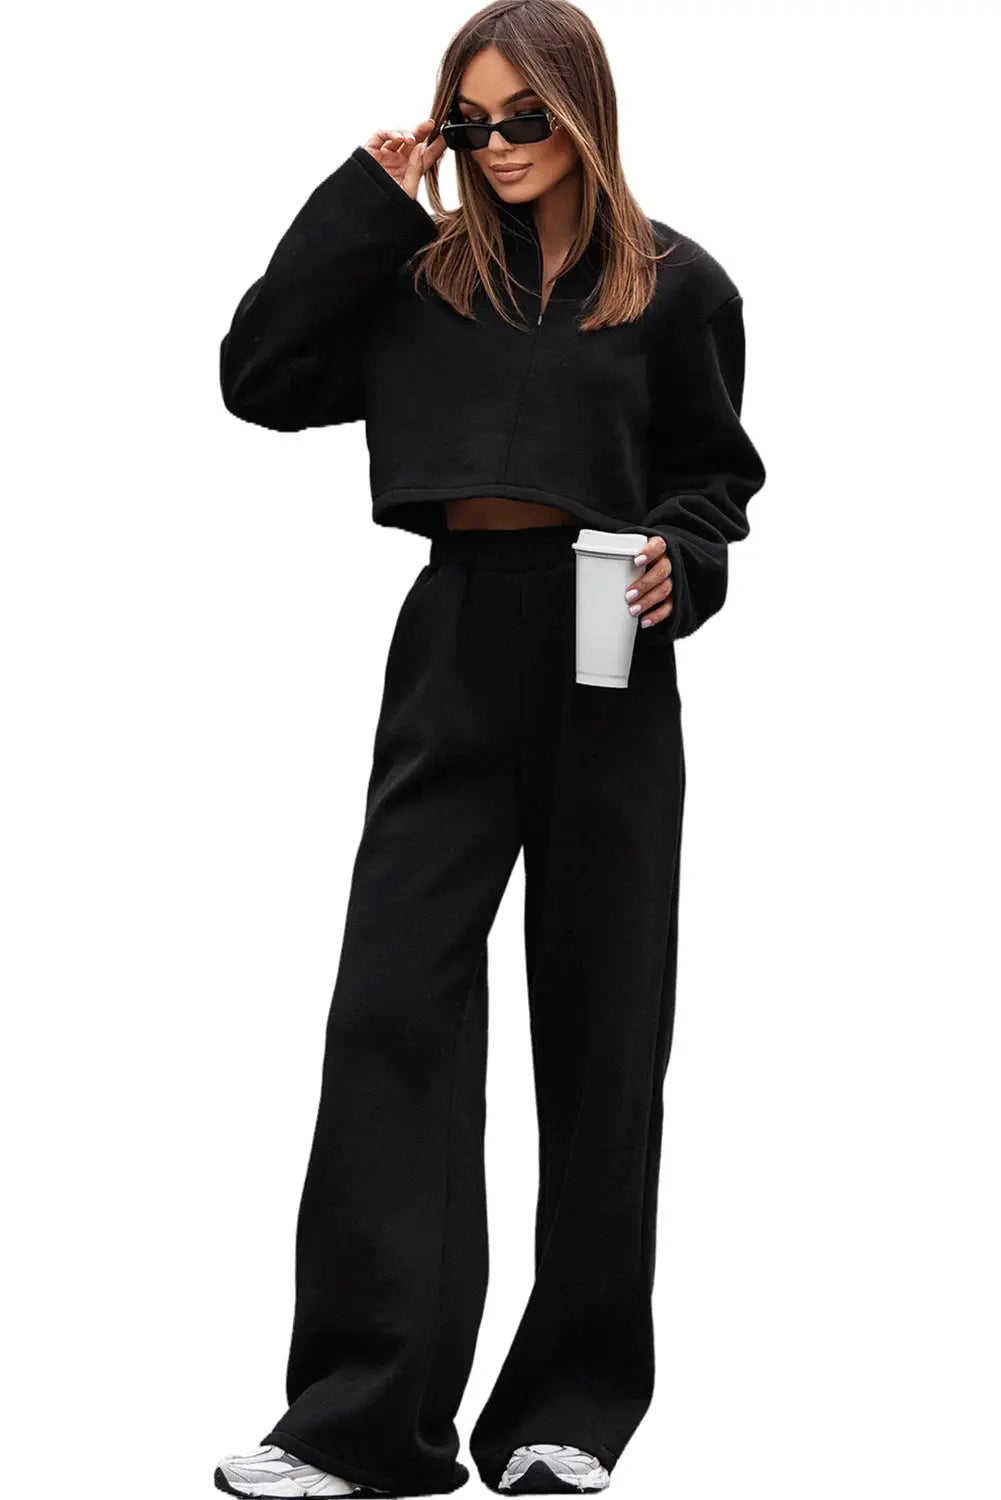 Black zipped collared crop top and wide leg pants set - sets